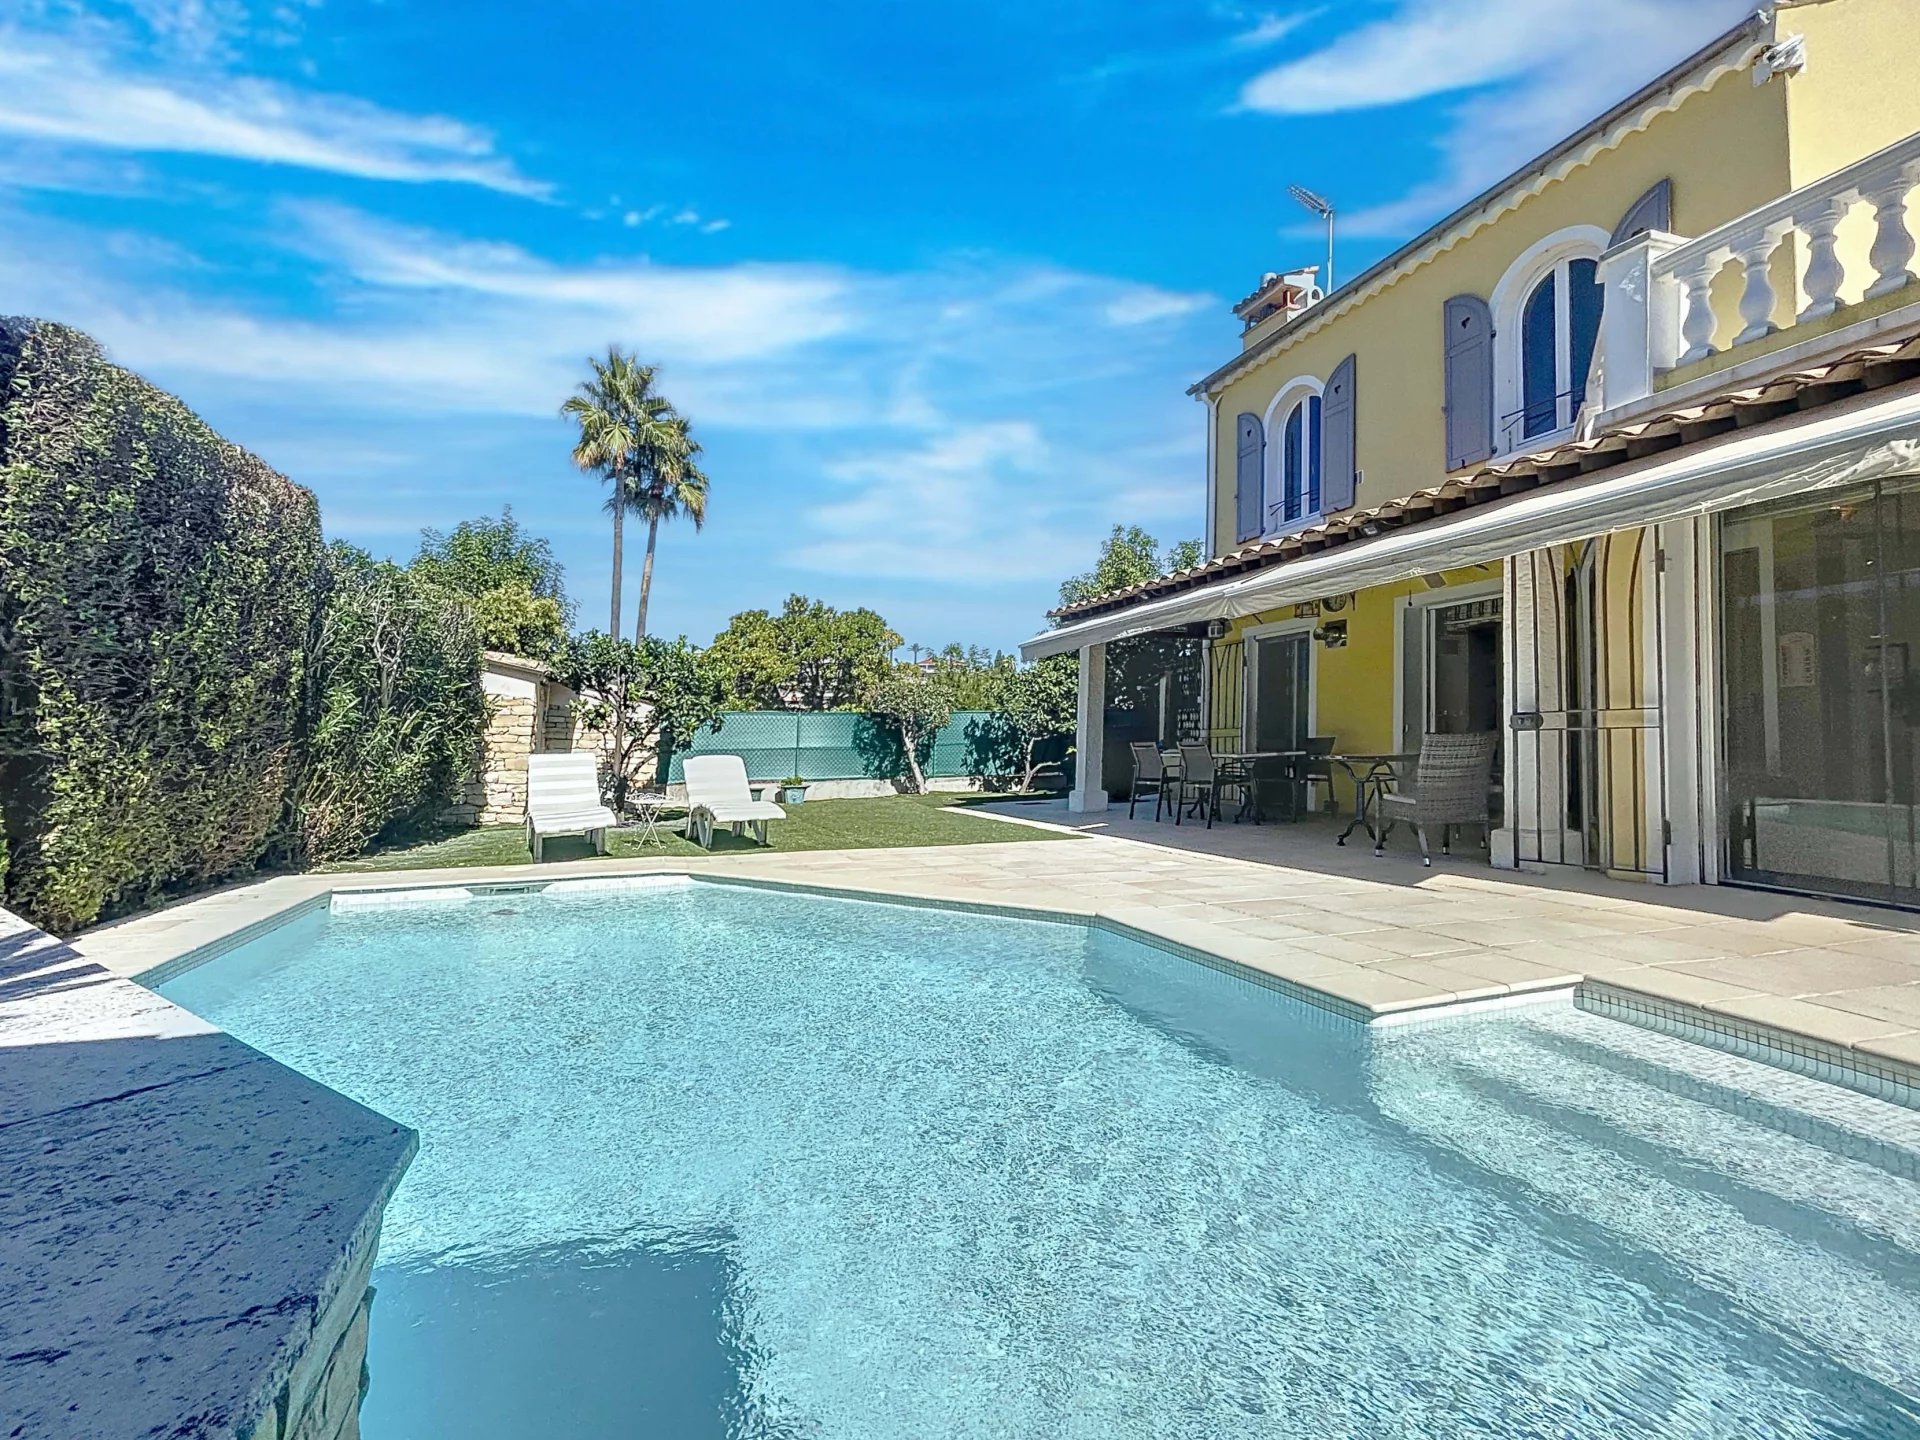 ANTIBES - For sale - A delightful Provencal villa of around 170 m², heated pool, close to shops, calm area